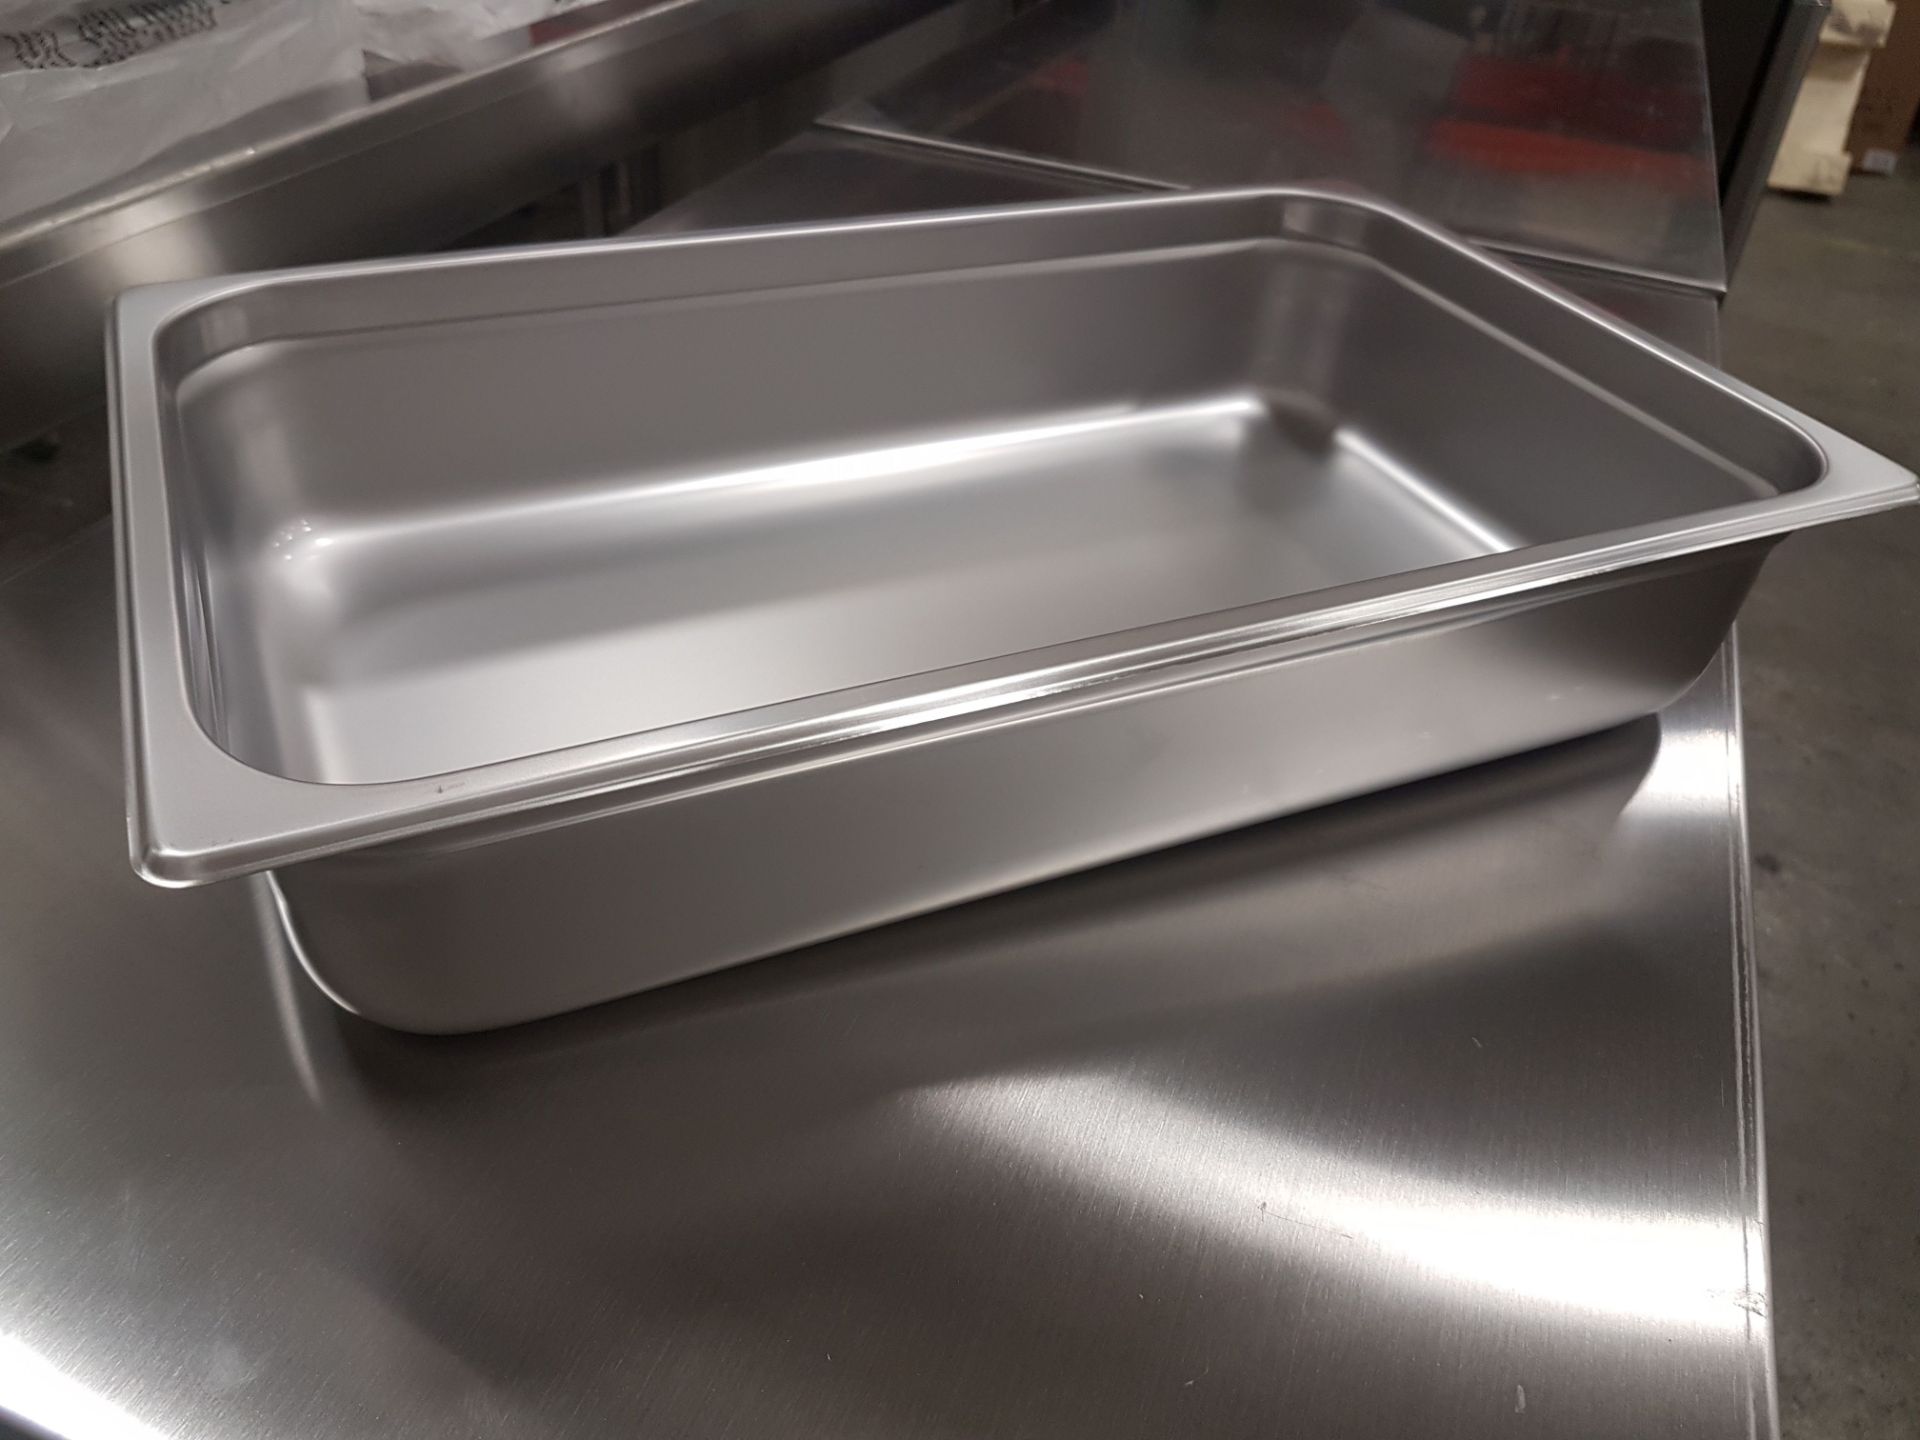 4" Deep Full Size Hotel / Food Pans - Lot of 6